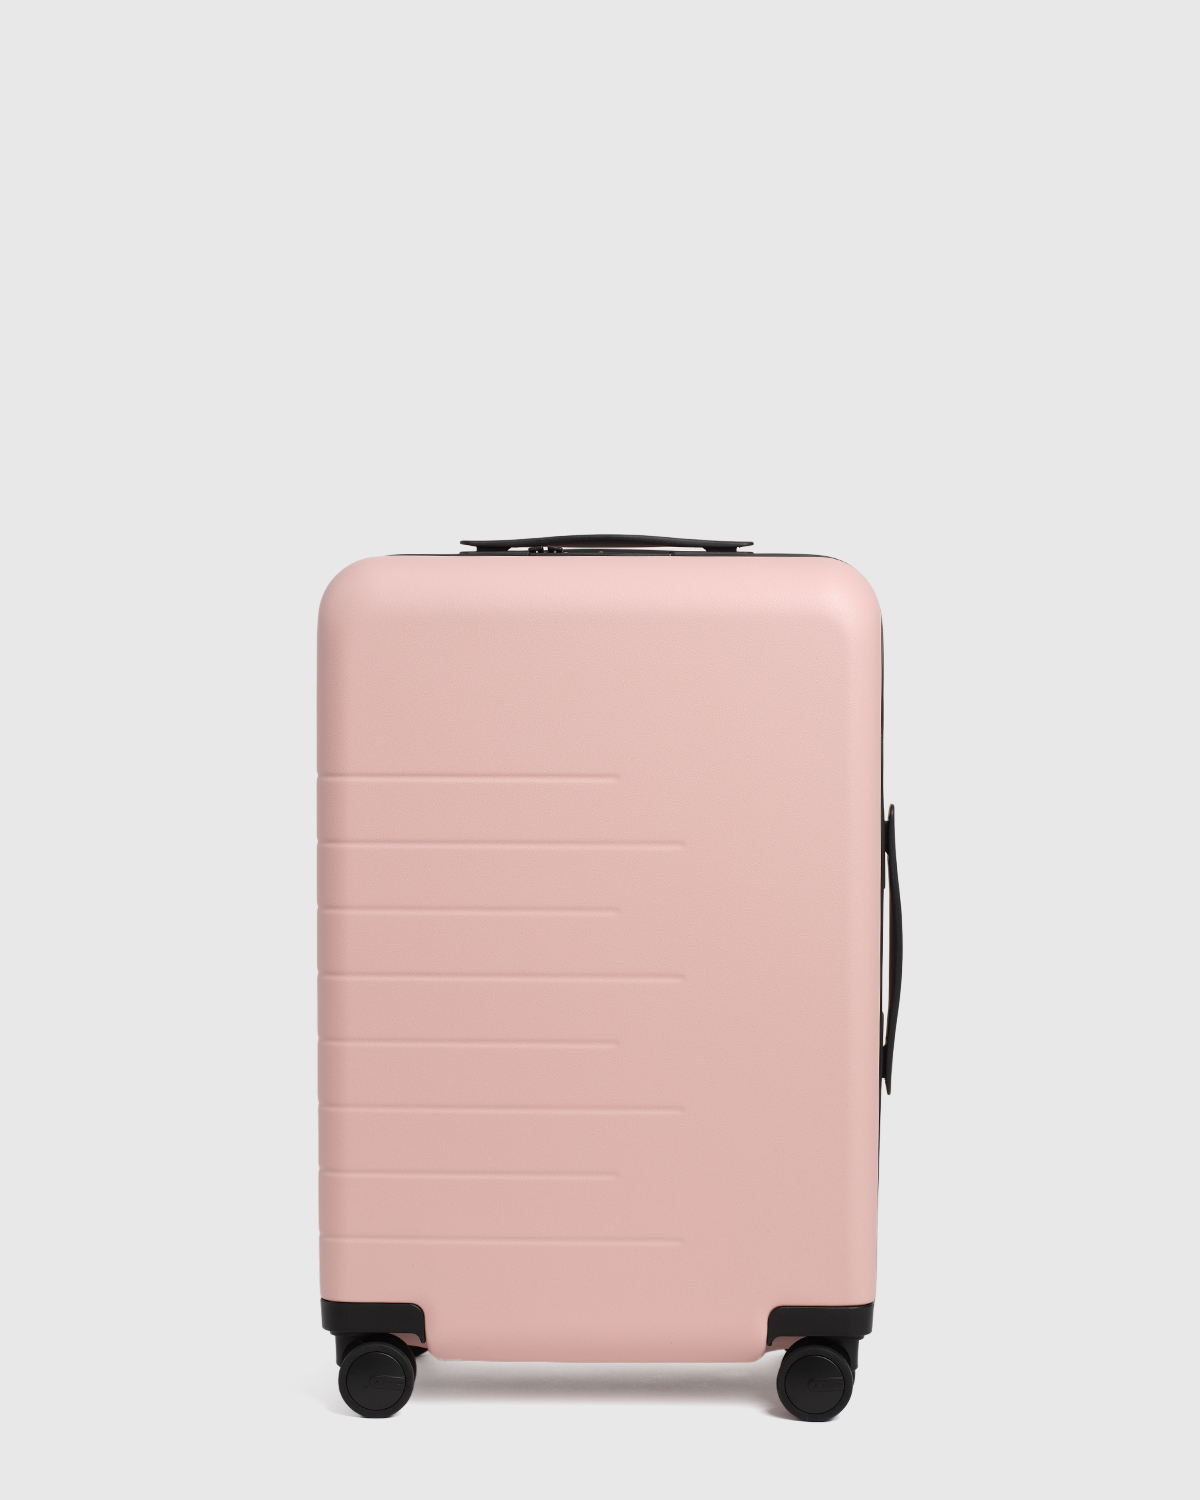 Quince Carry-on Hard Shell Suitcase 20" In Light Pink